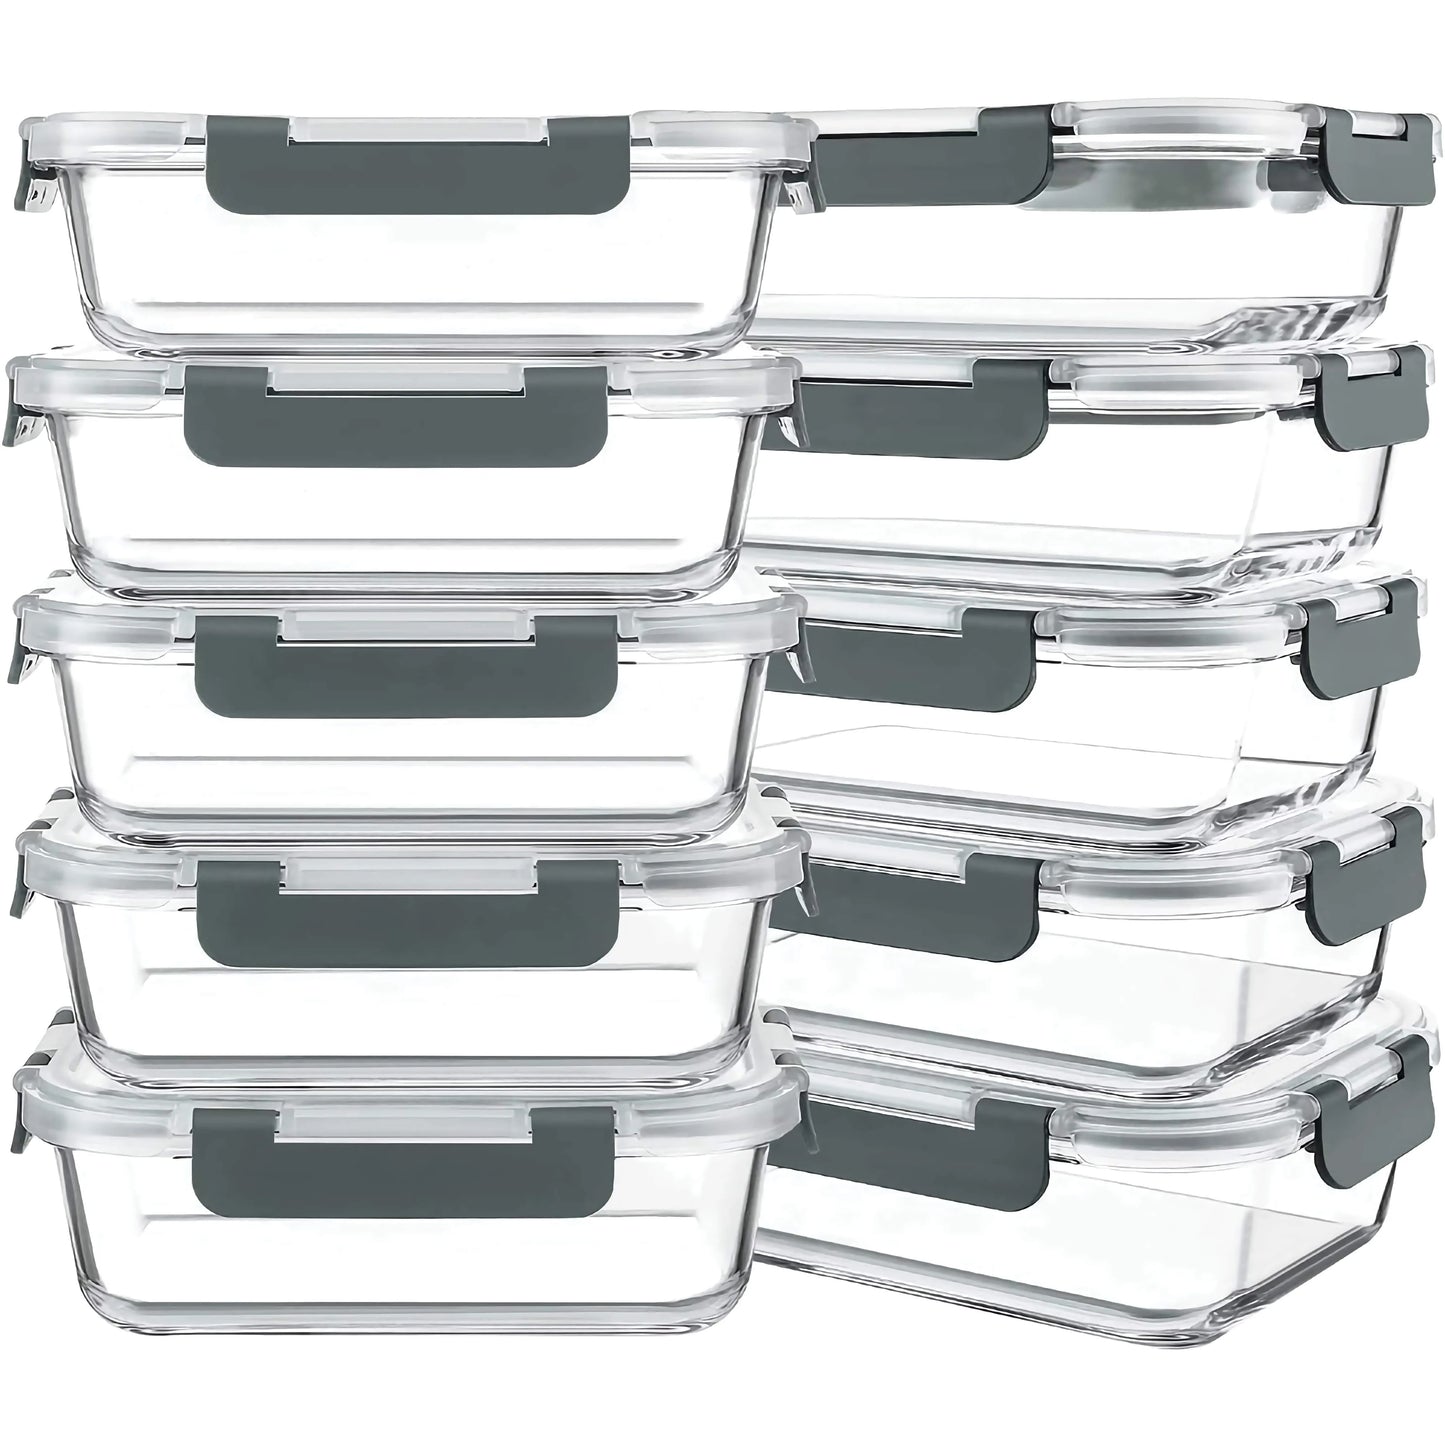 Glass Meal Prep Containers with Lids Lunch Boxes Reusable Food Storage